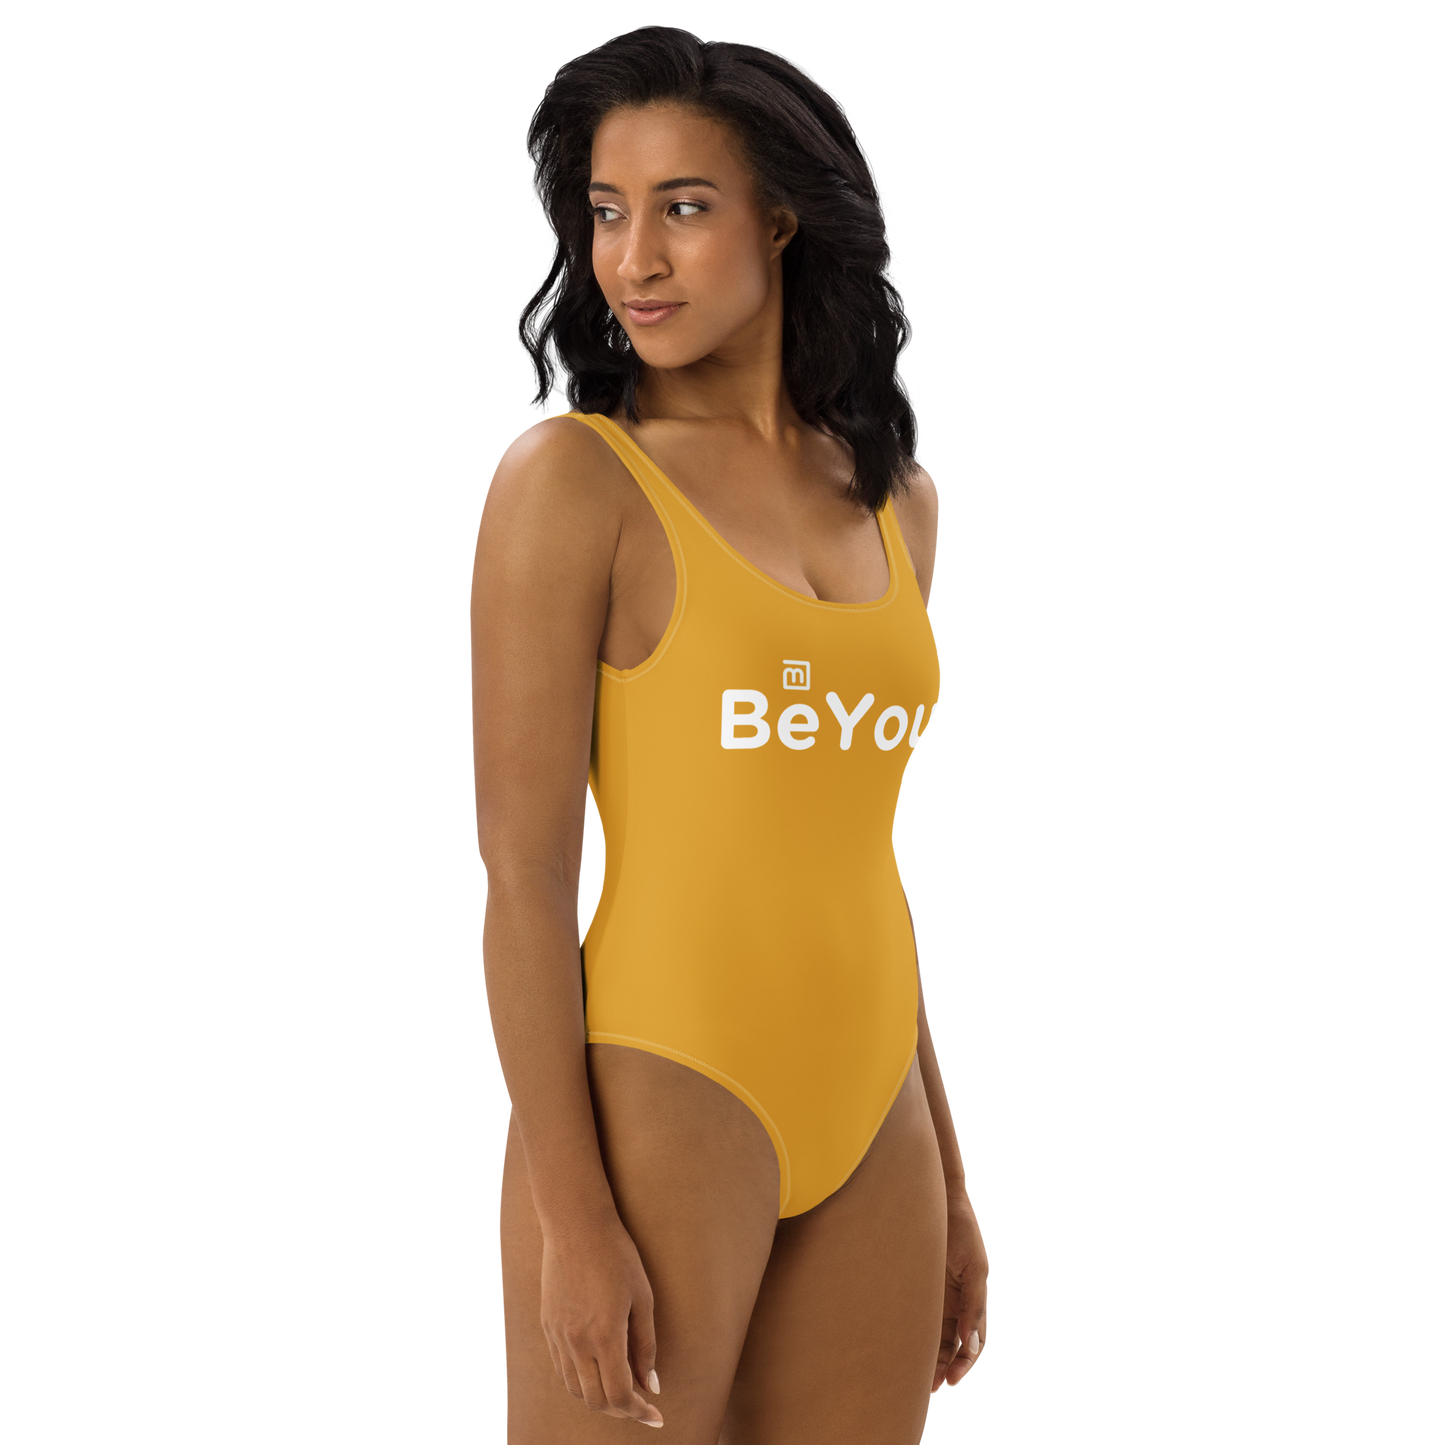 Buttercup Gold One-Piece Body Shaper BeYou Performance Swimsuit